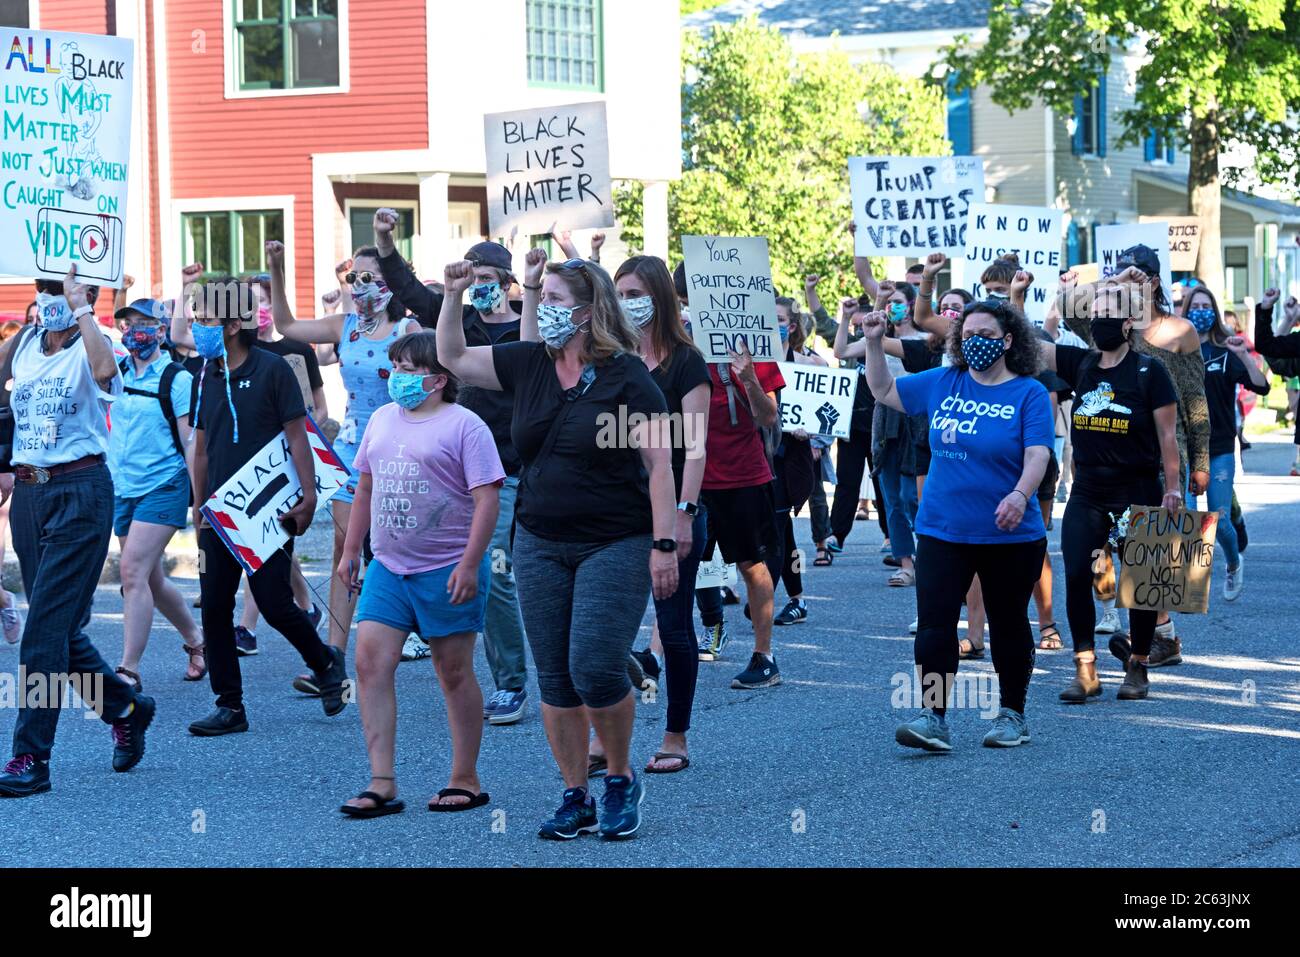 Bar Harbor, Maine, USA. 06 July, 2020. Marchers in a protest led by the Mount Desert Island Racial Justice Collective walk silently down Ledgelawn Avenue with a fist raised in support of Black Lives Matter. ©Jennifer Booher/Alamy Live News Stock Photo